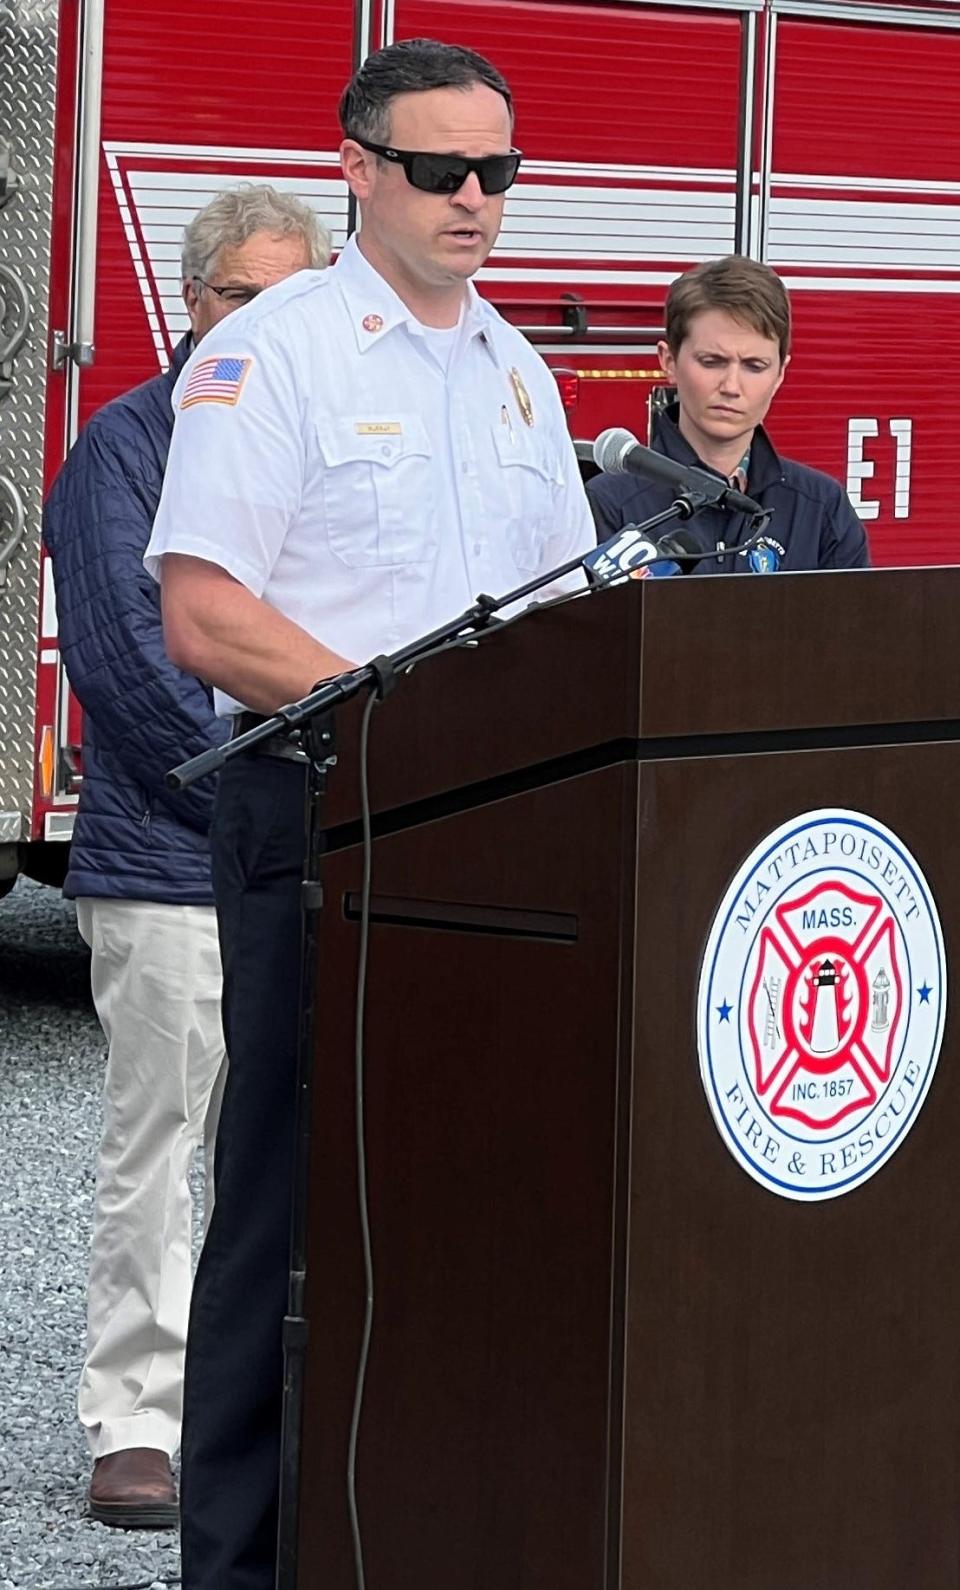 Mattapoisett Fire Chief Andrew Murray said, the "four unsung heroes risked their lives. They pushed into a burning building with fire and flames rolling over their heads. They called it, 'the monster.'"